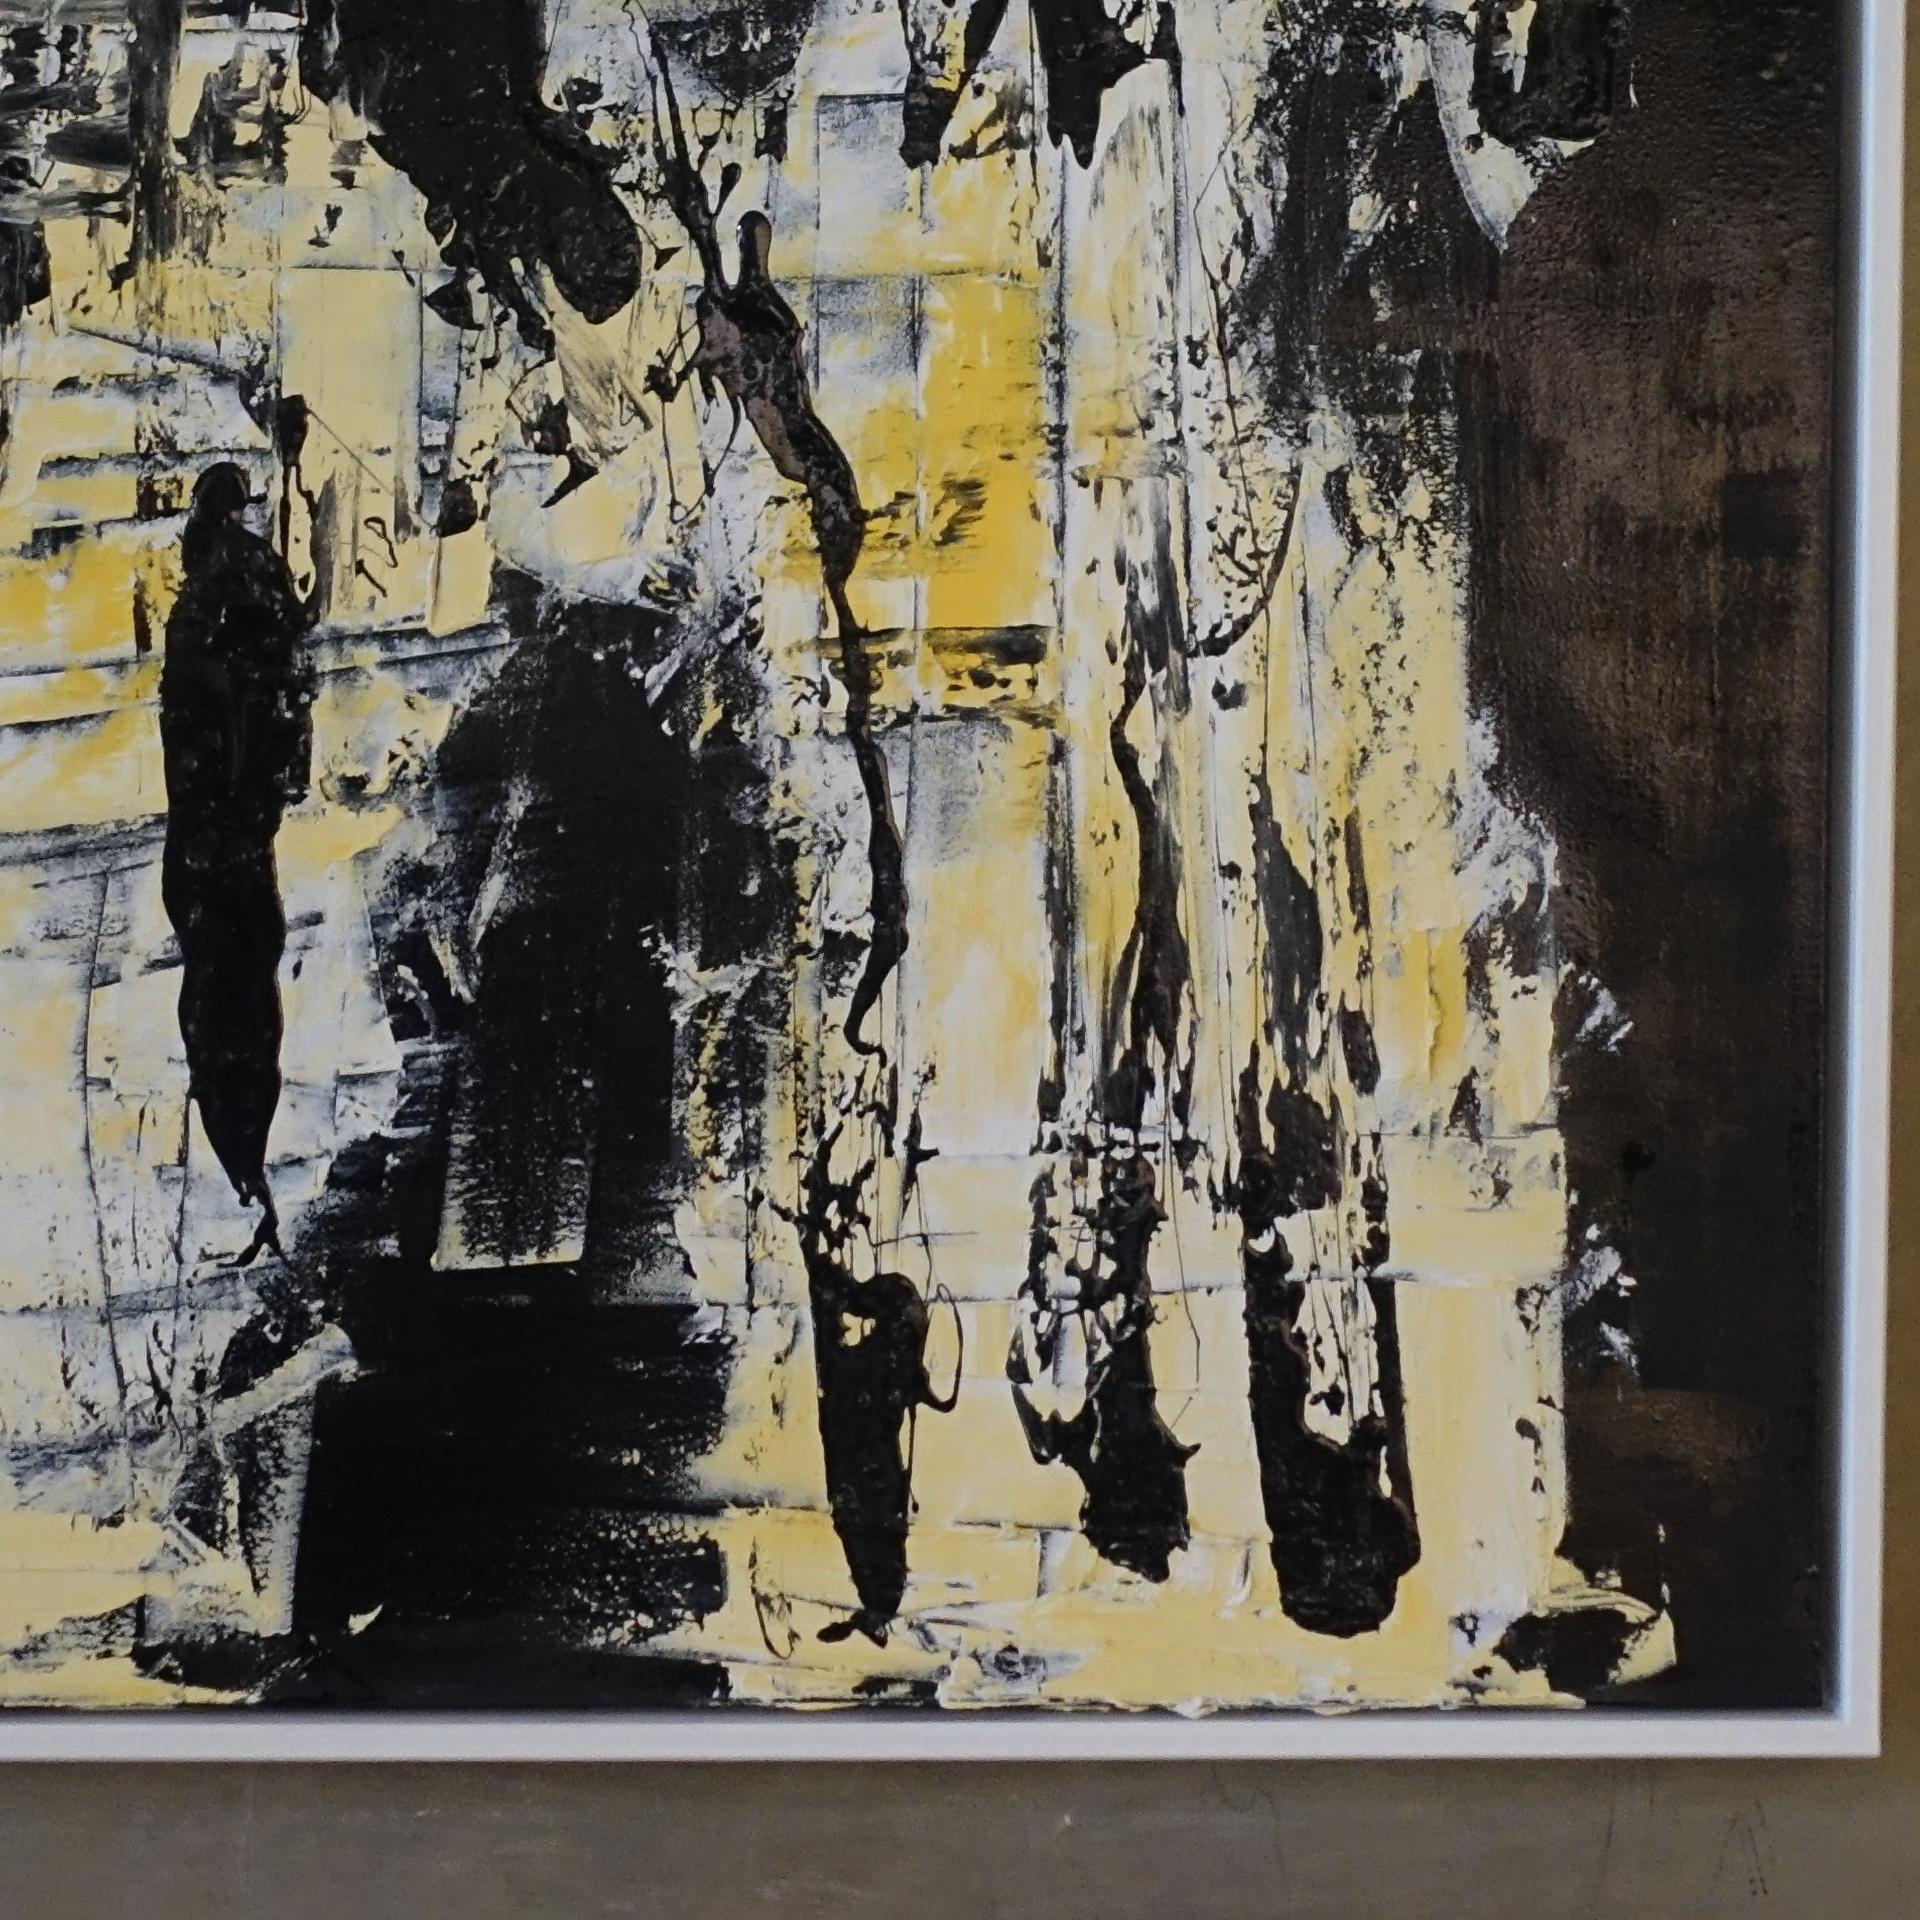 Mixed media on canvas, black, white yellow, plaster and acrylic, white wood Frame Marco Croce, Italy, 2019.